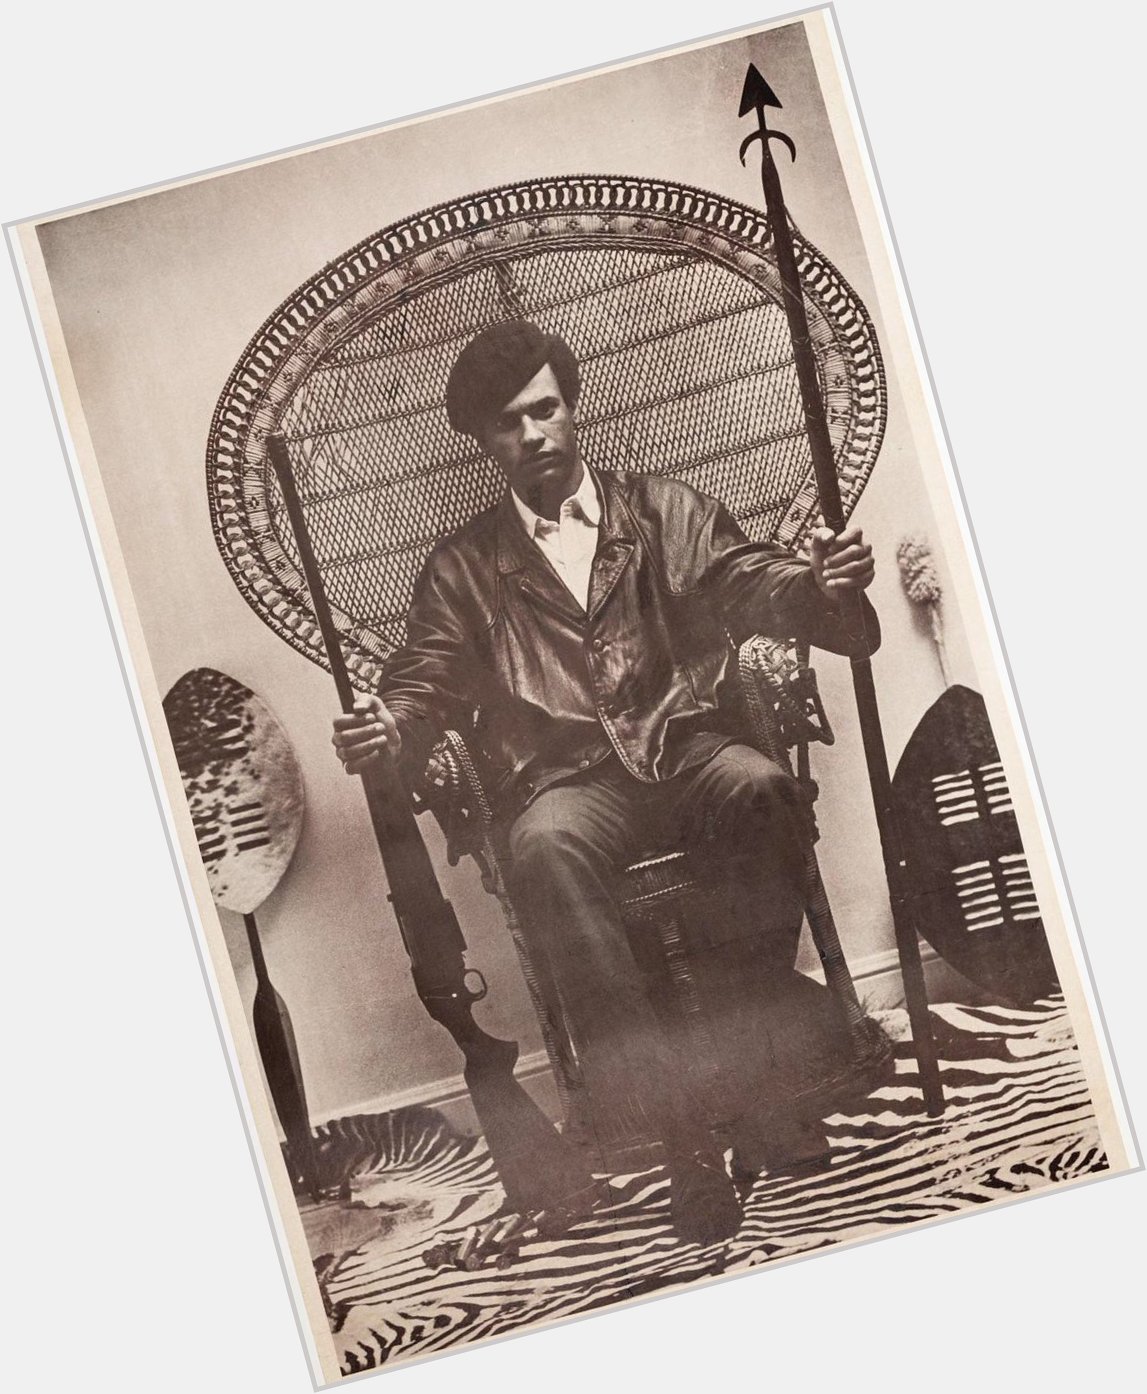 Happy Birthday to the real Huey P. Newton, flaws and all. 